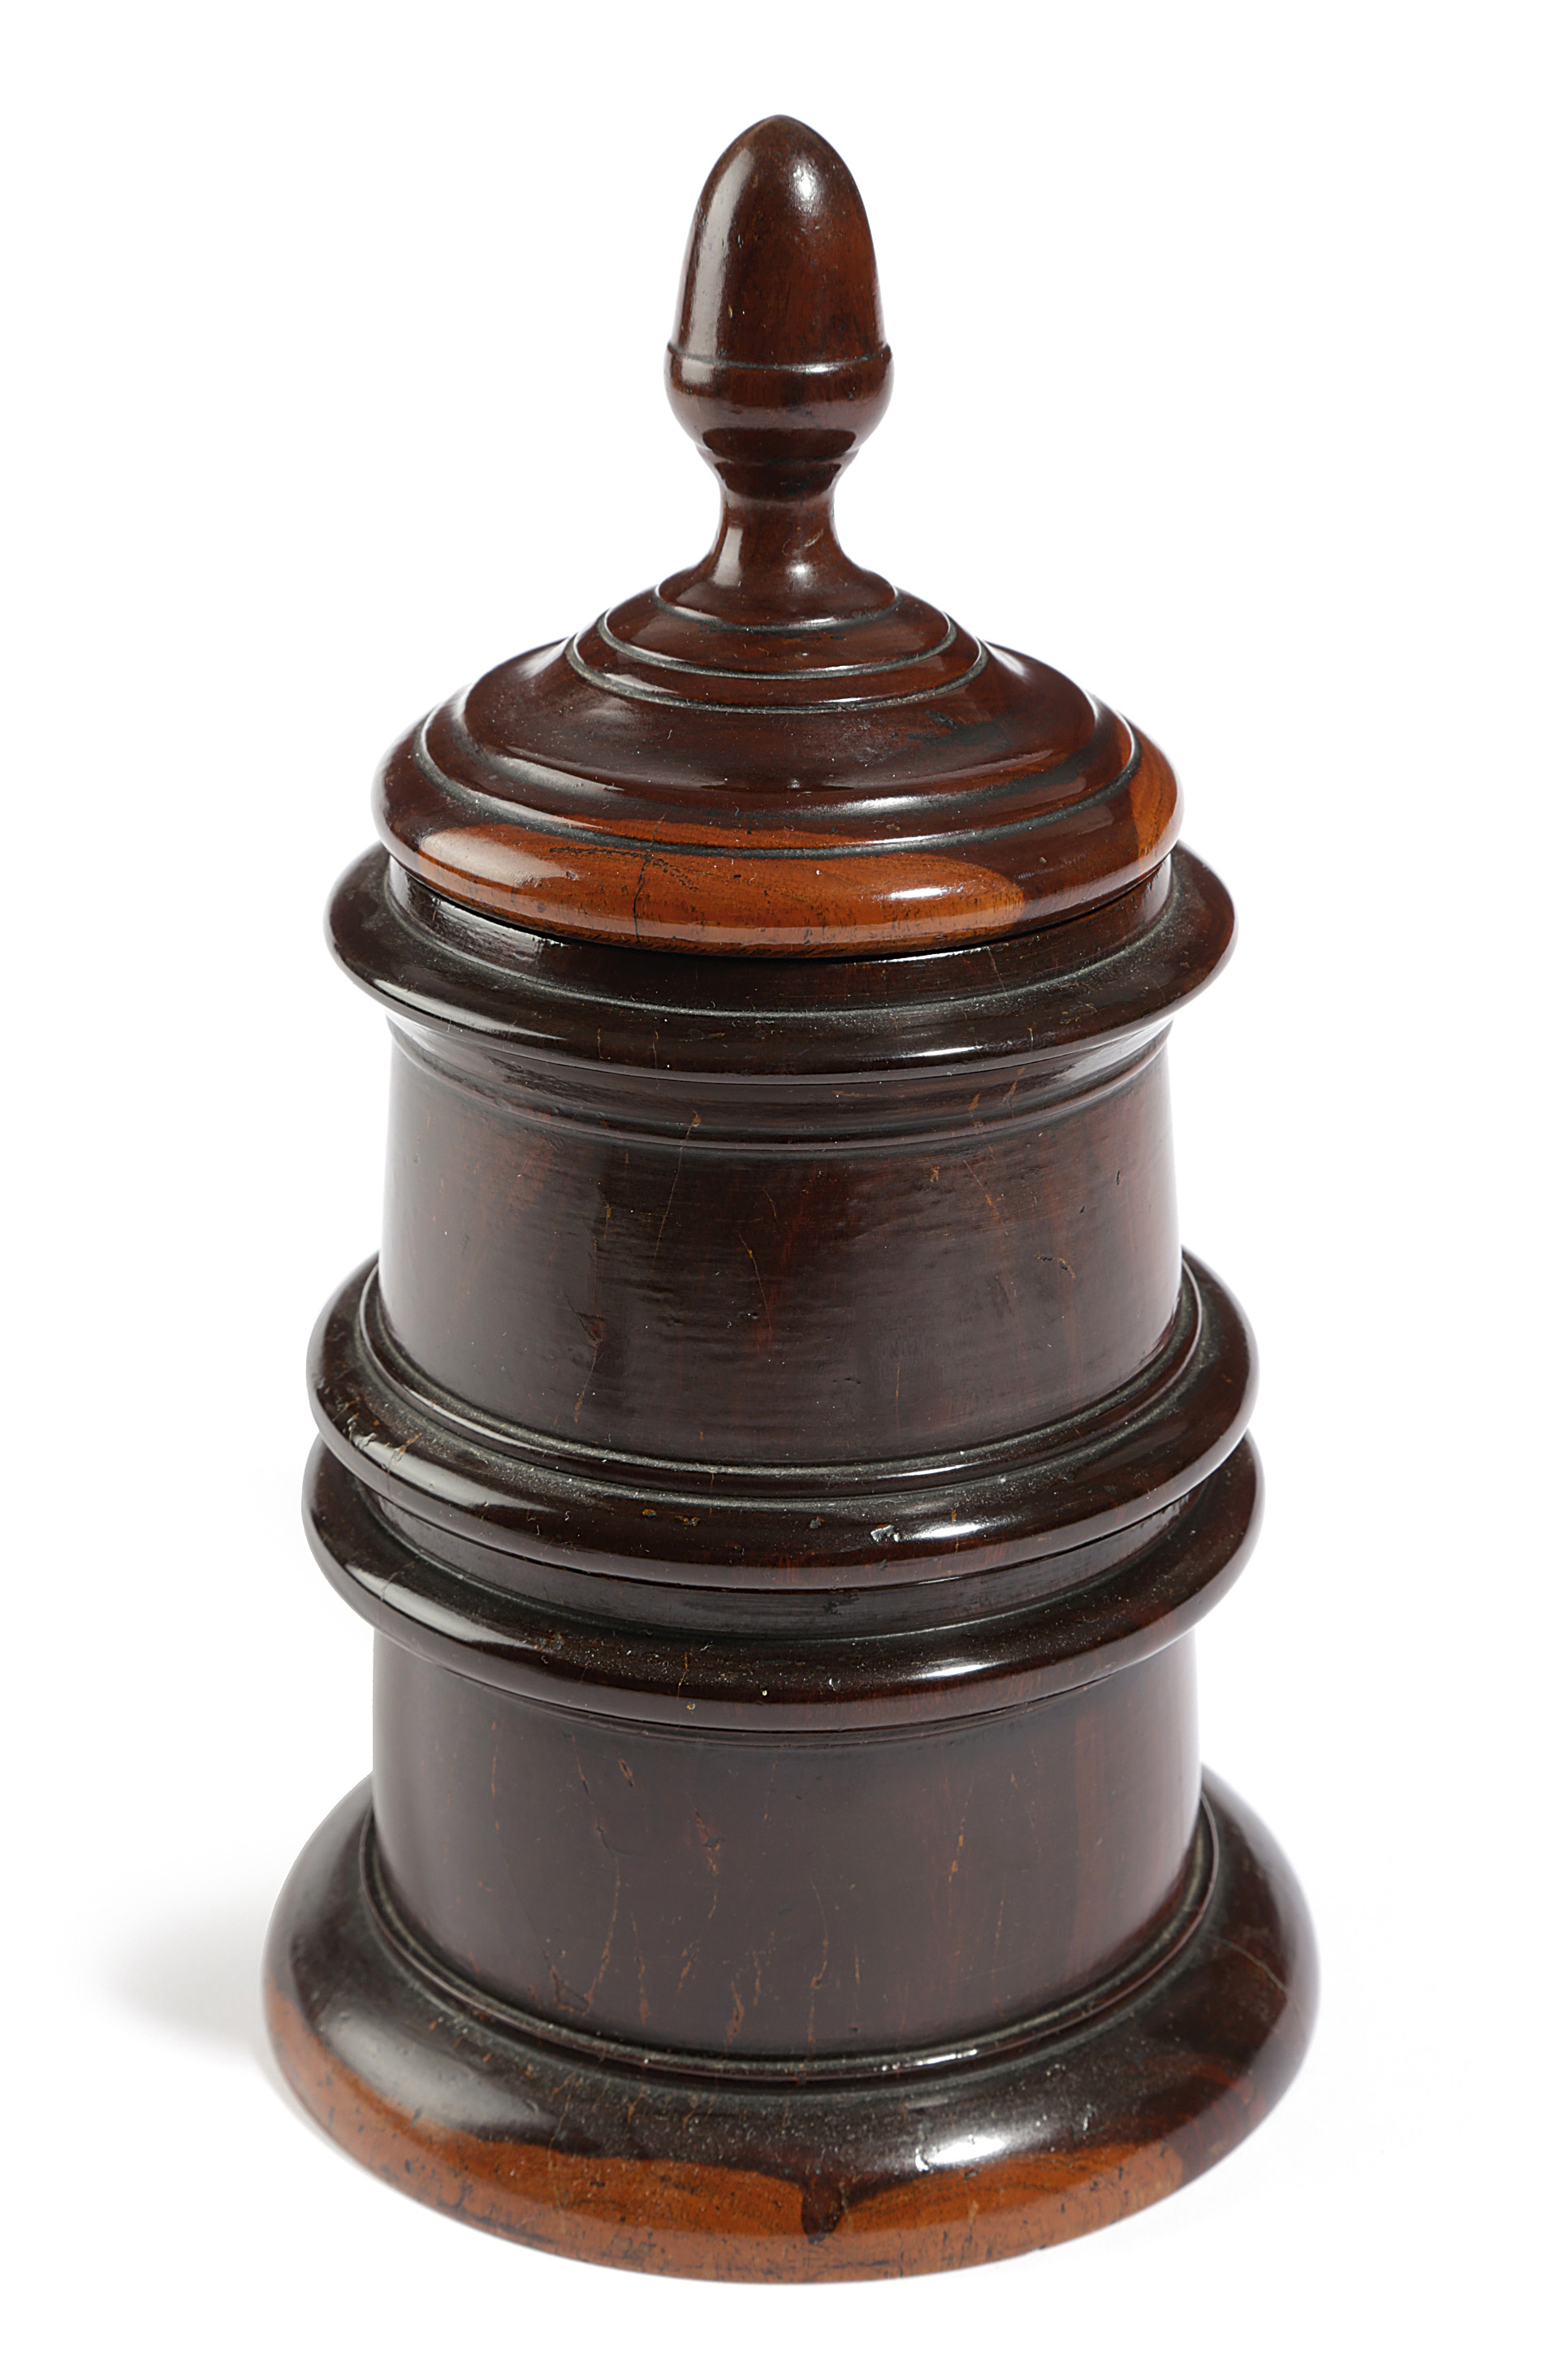 A TREEN LIGNUM VITAE TOBACCO JAR EARLY 19TH CENTURY the lid with an acorn finial, the body with